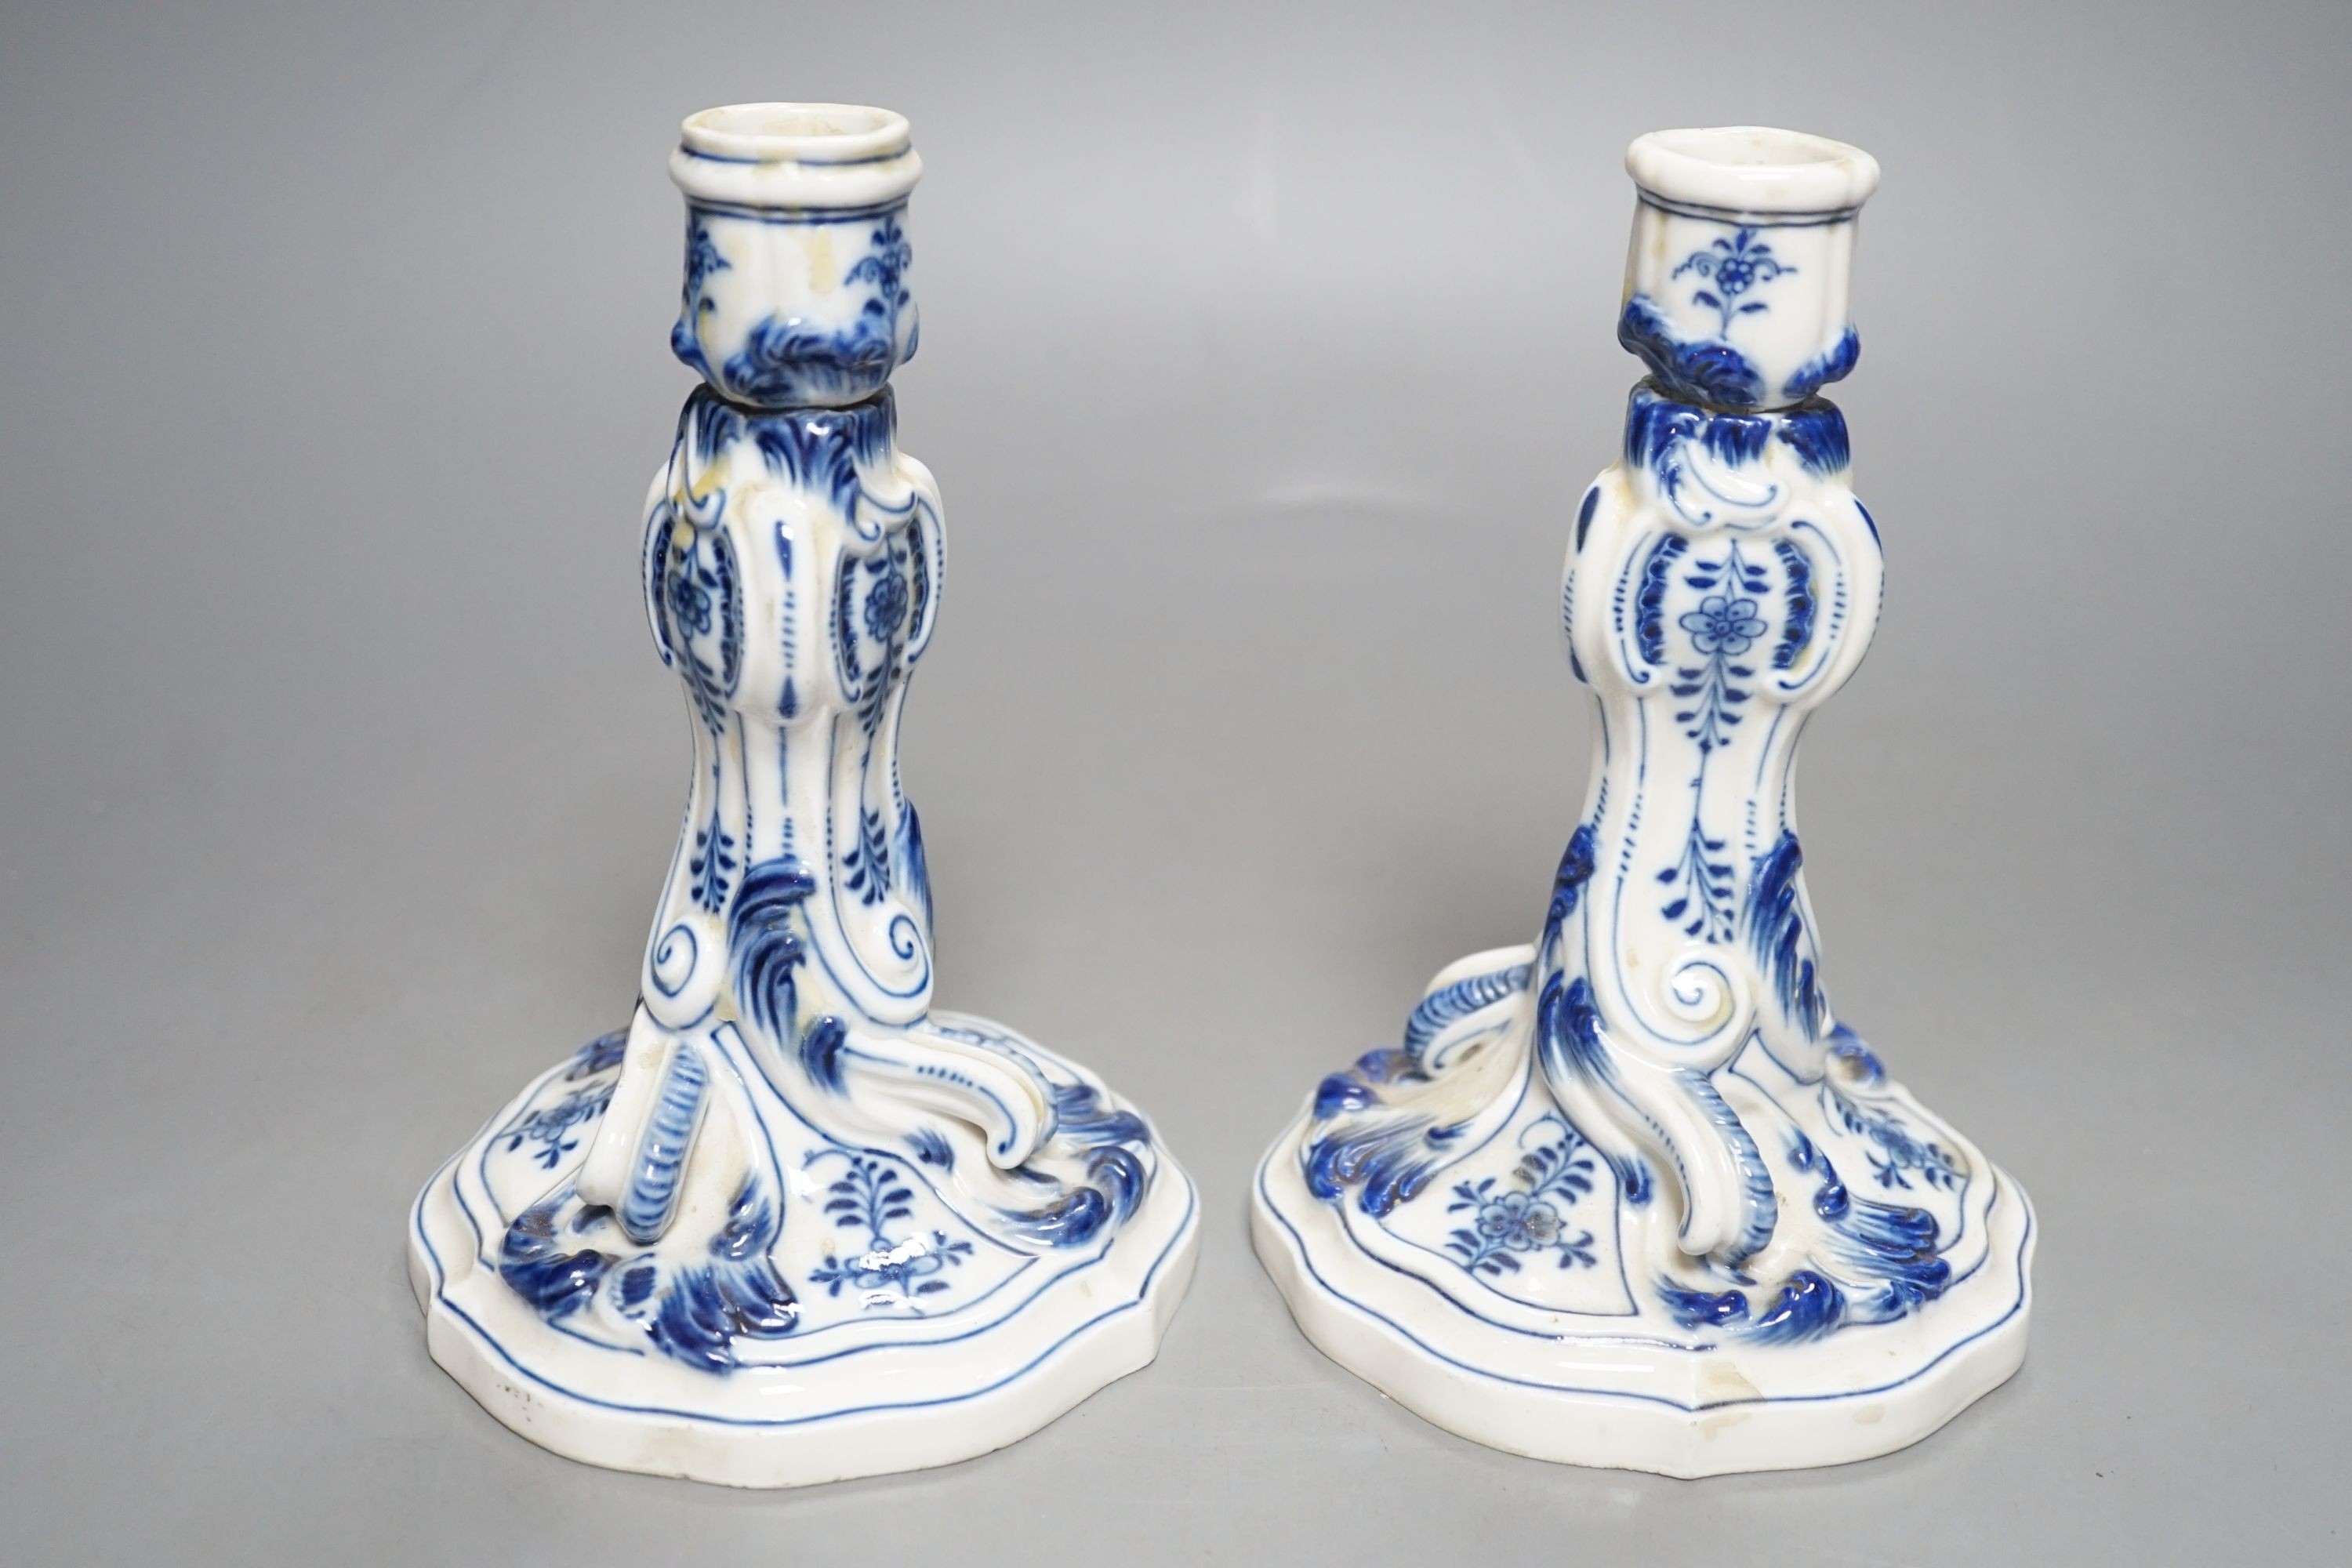 A pair of late 19th century blue and white Meissen onion pattern candlesticks - 17cm tall